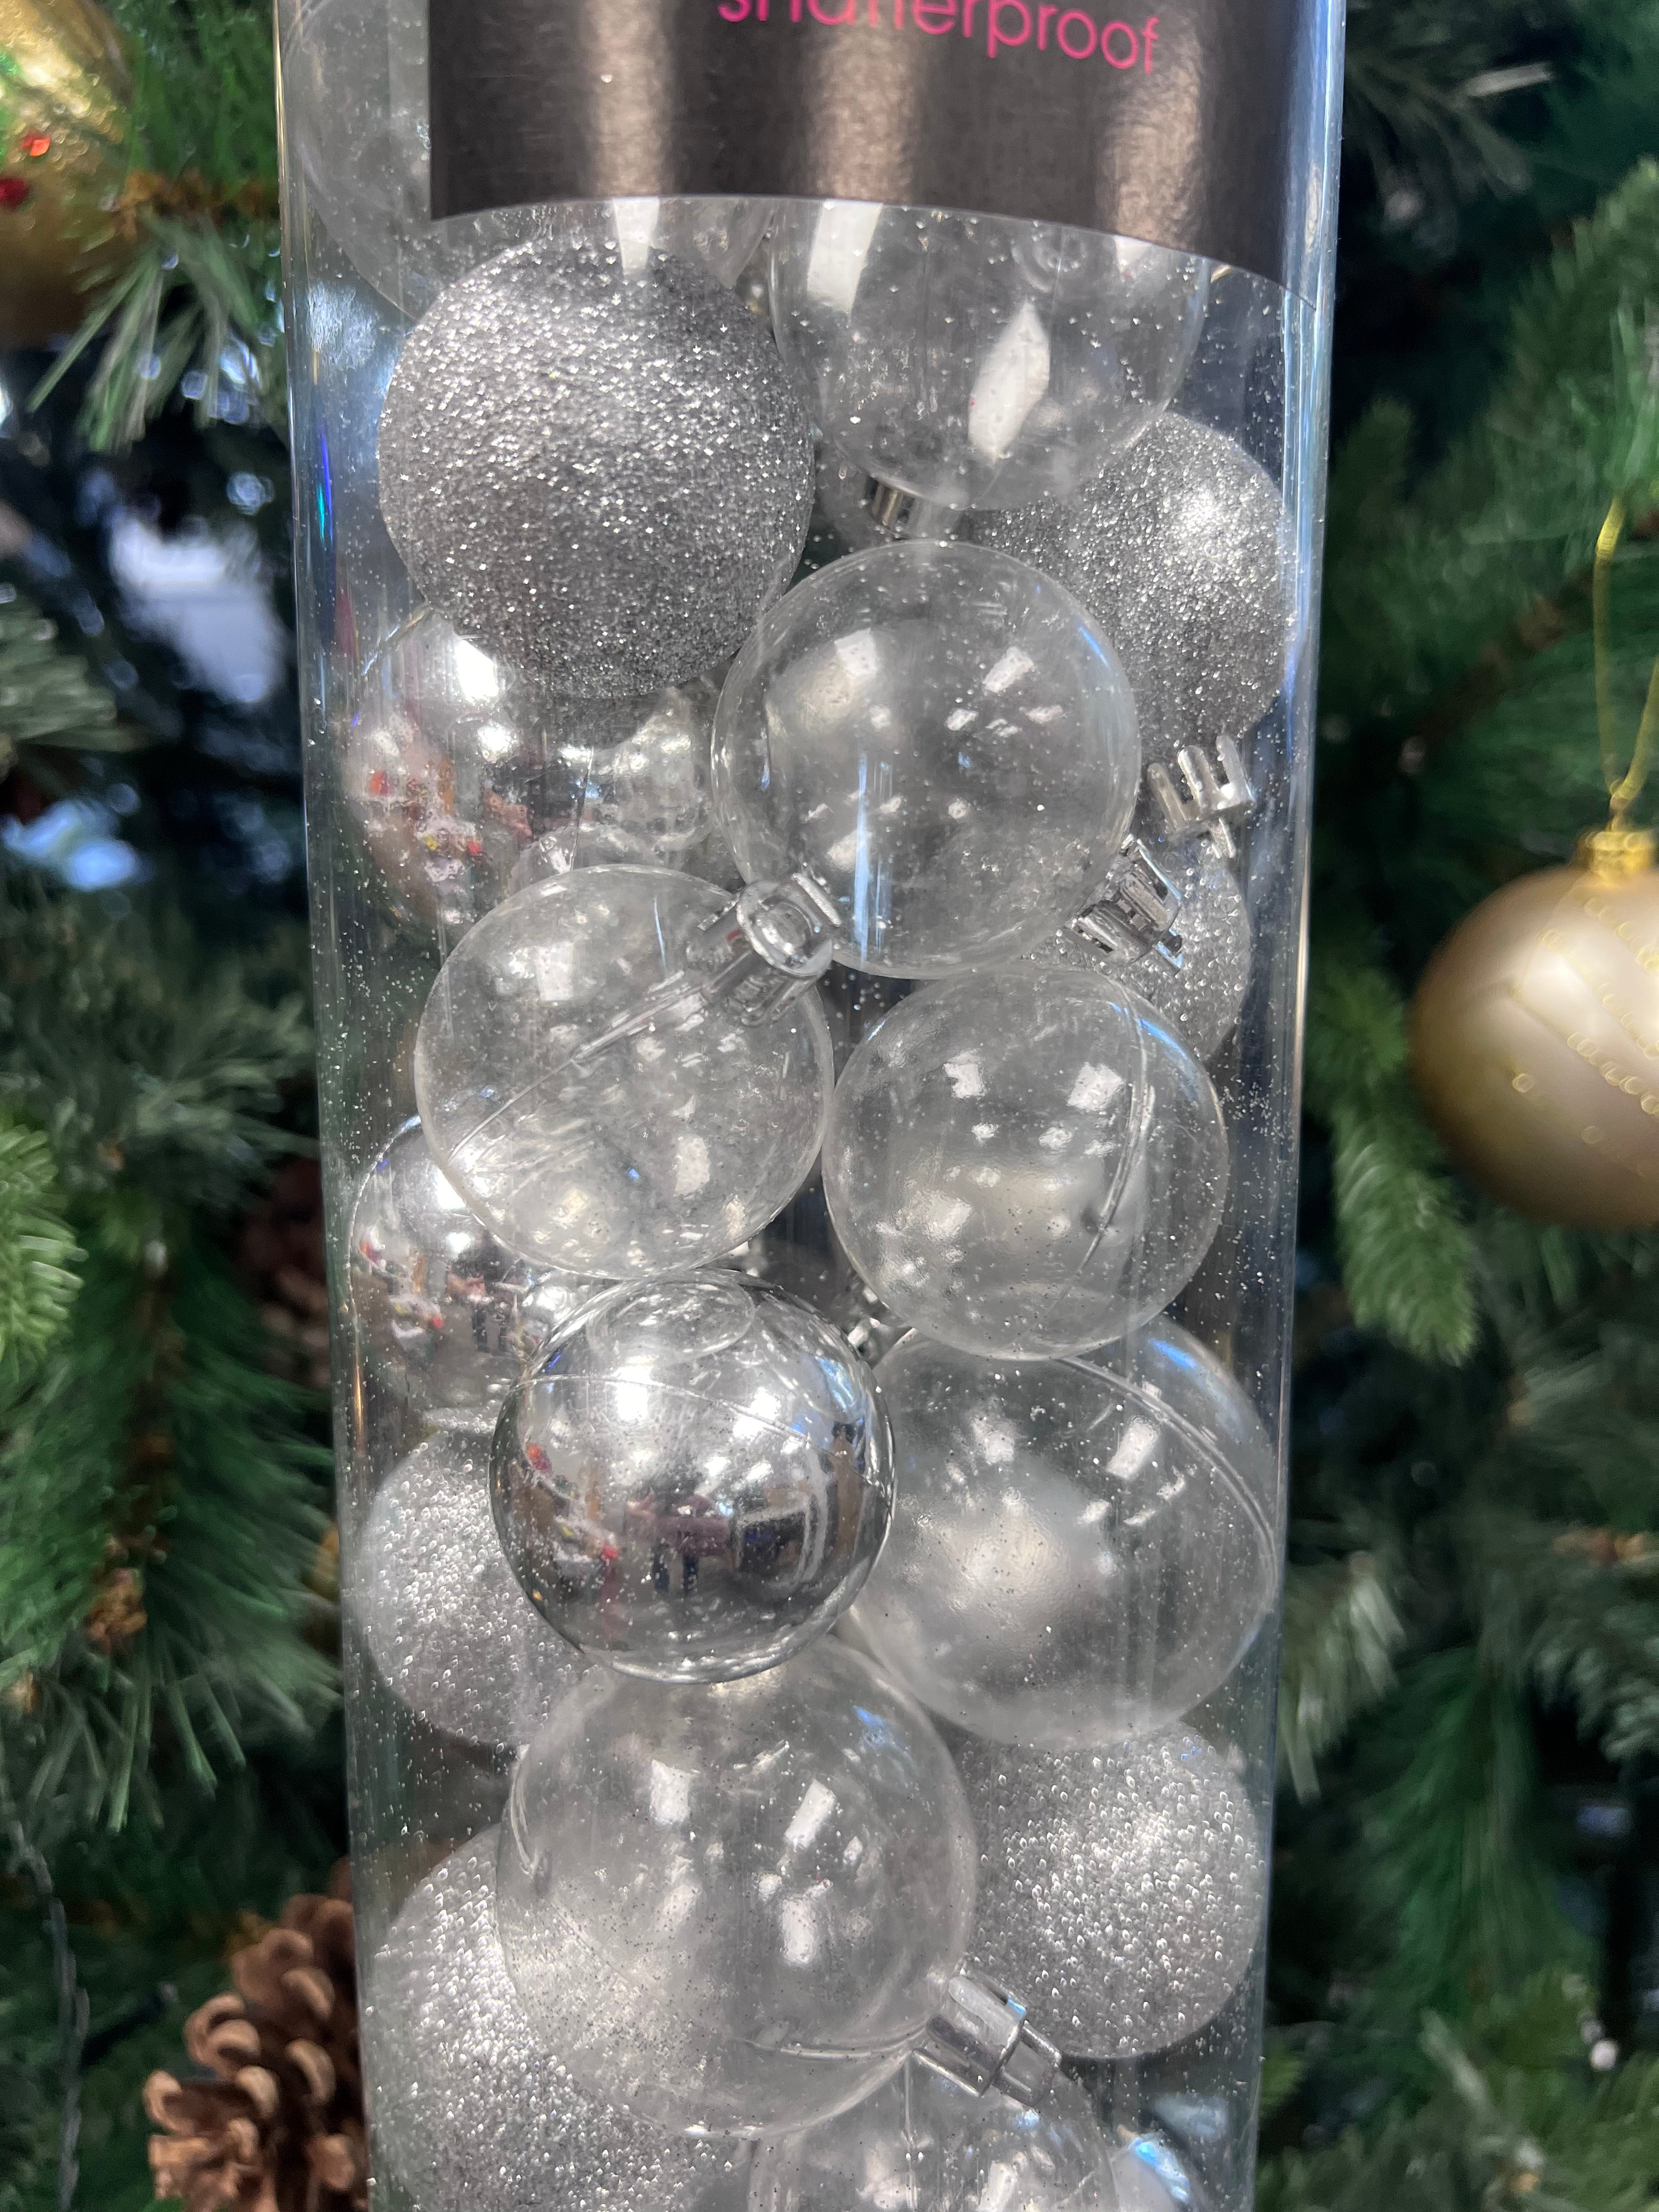 100 Shatterproof Christmas Bauble Decorations - 3 Colours Available